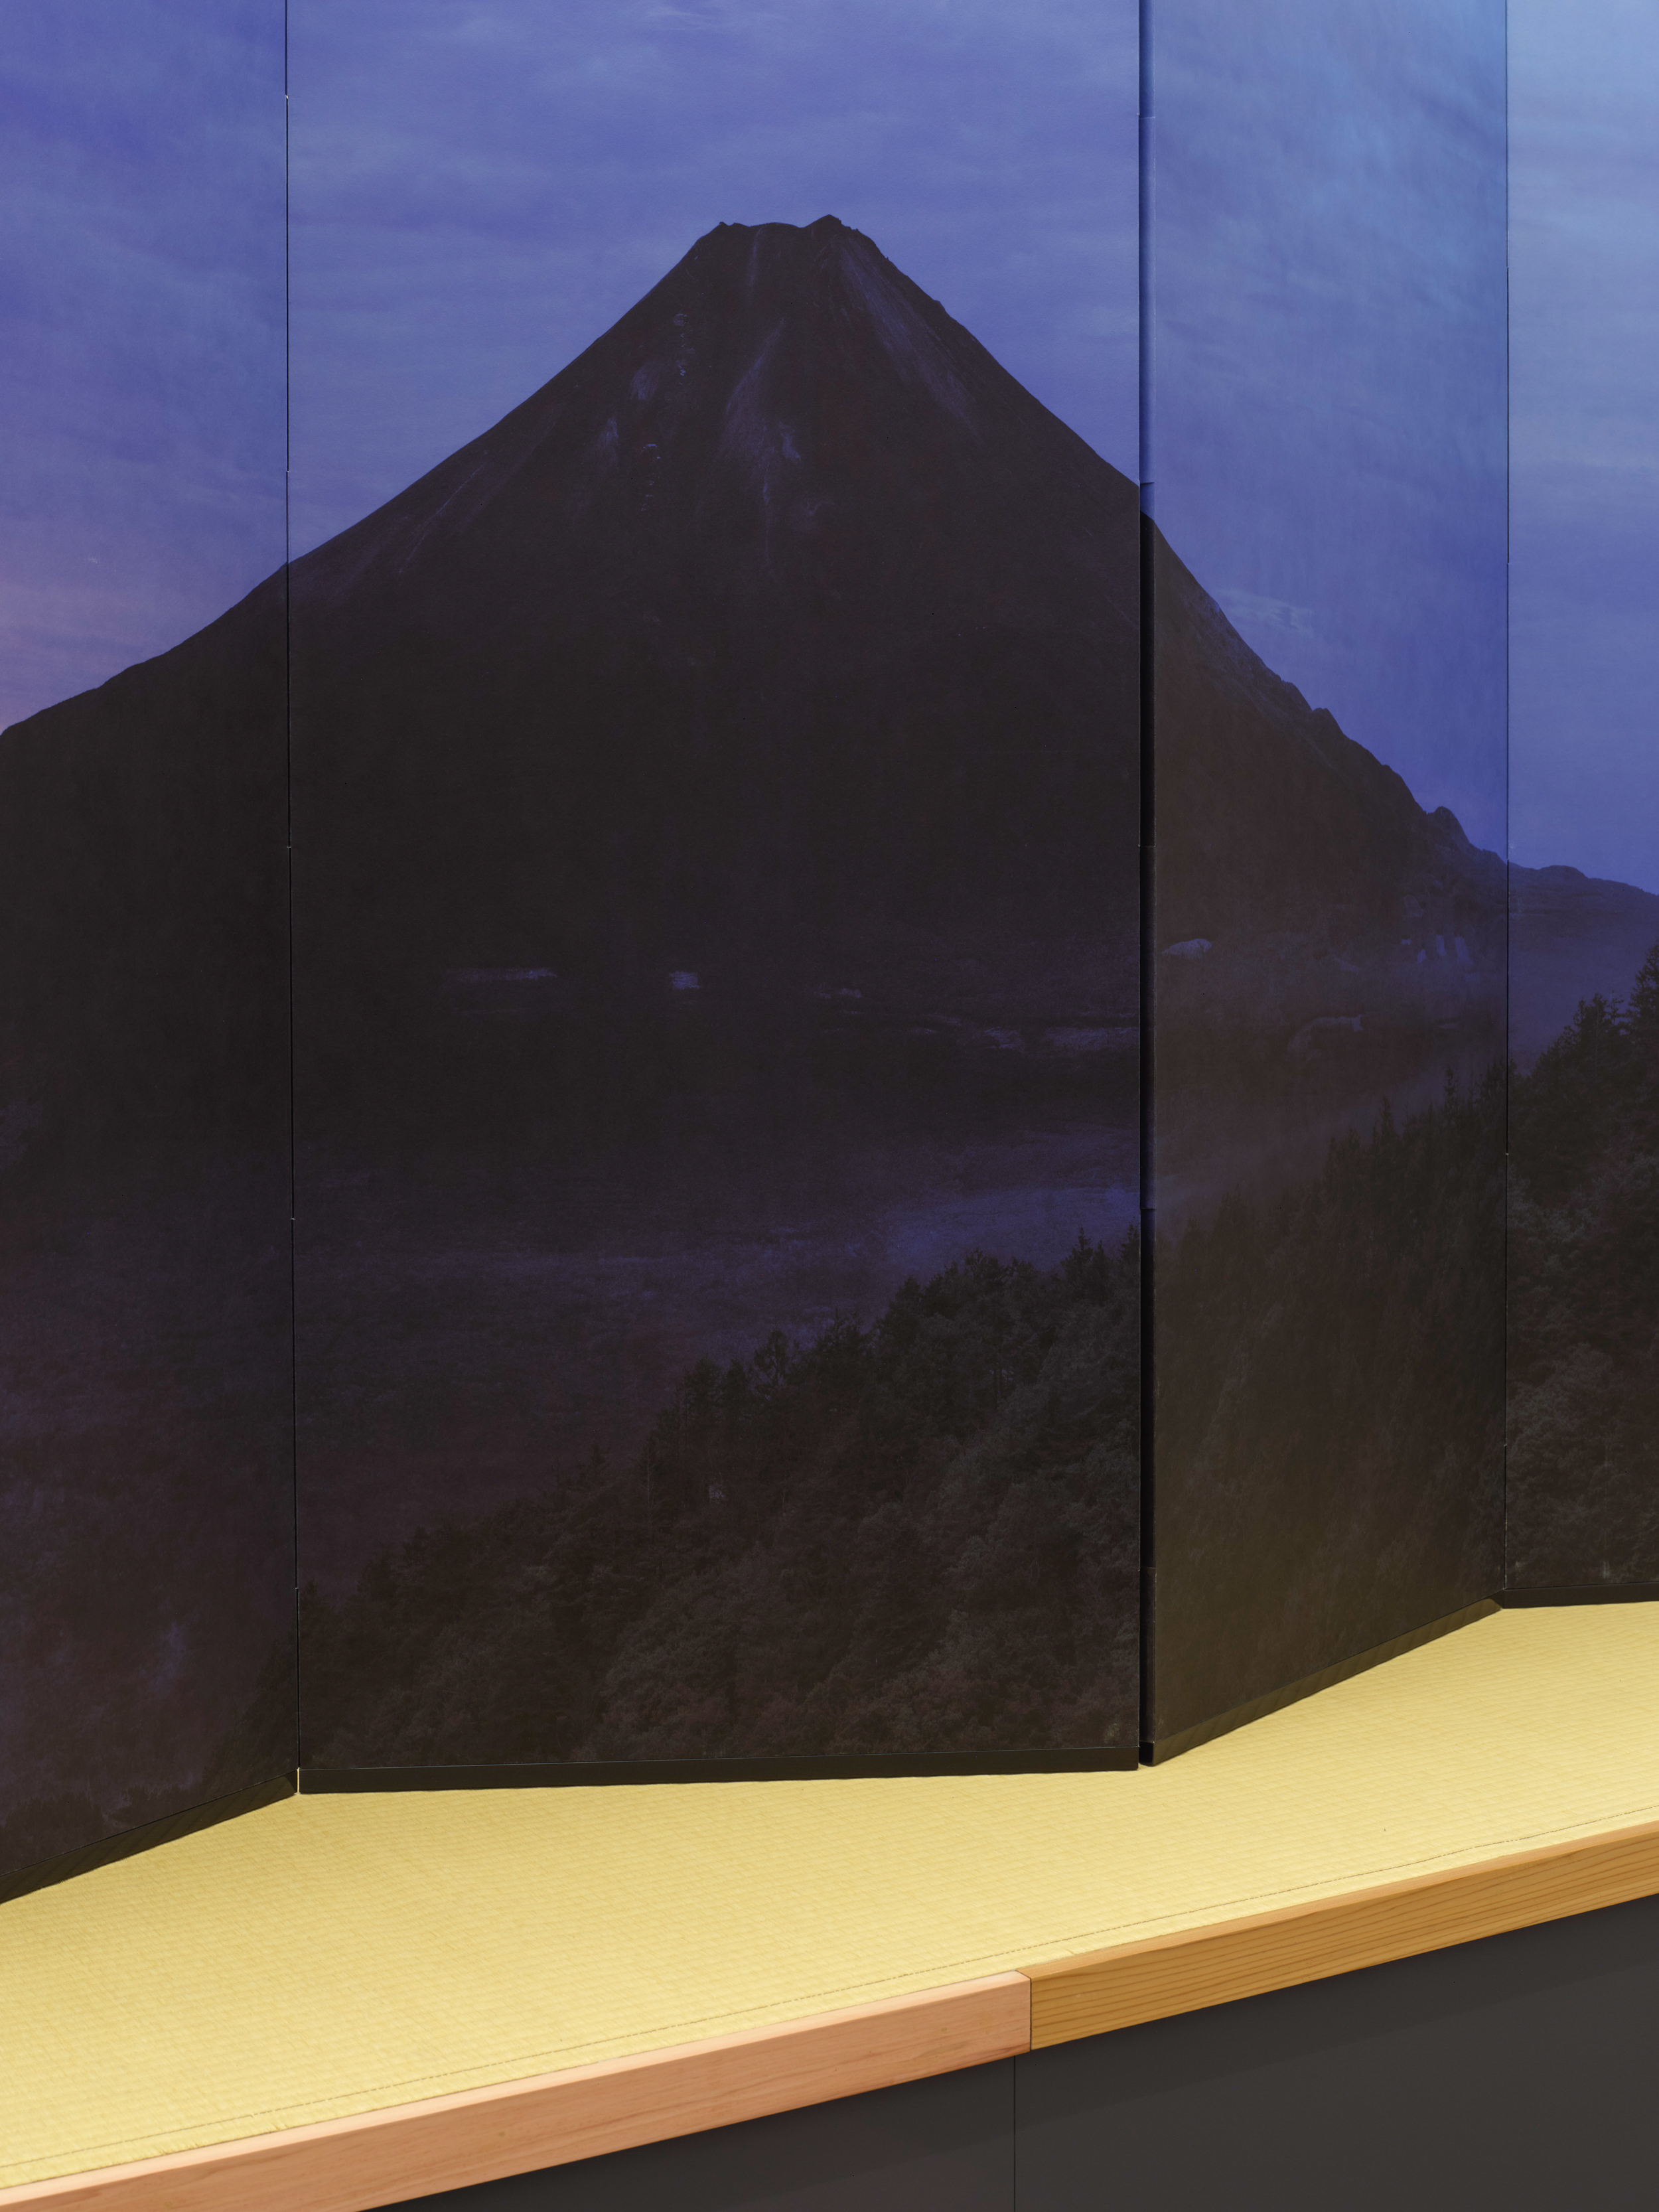 An instillation shot of a folding screen with Mt. Fuji depicted on the screen